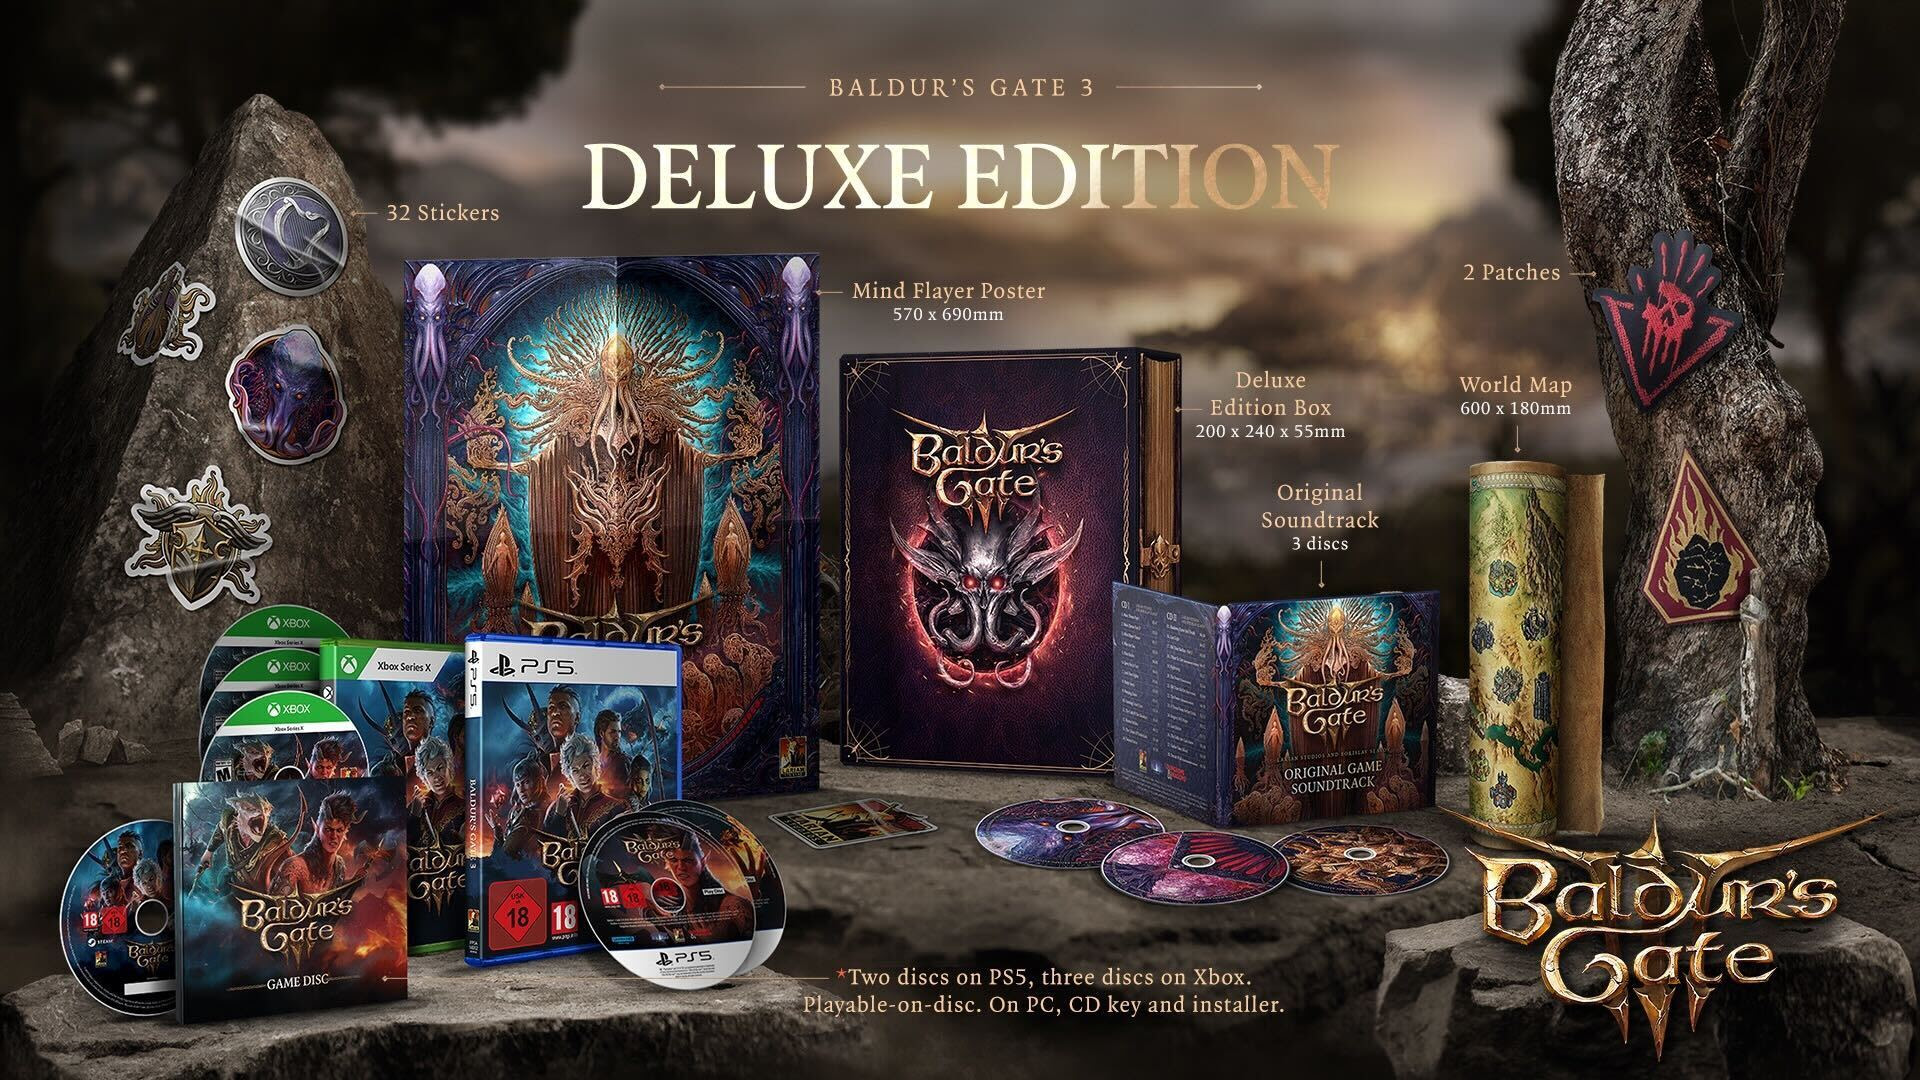 Baldur’s Gate 3 Physical Deluxe Edition Includes a Map and Soundtrack